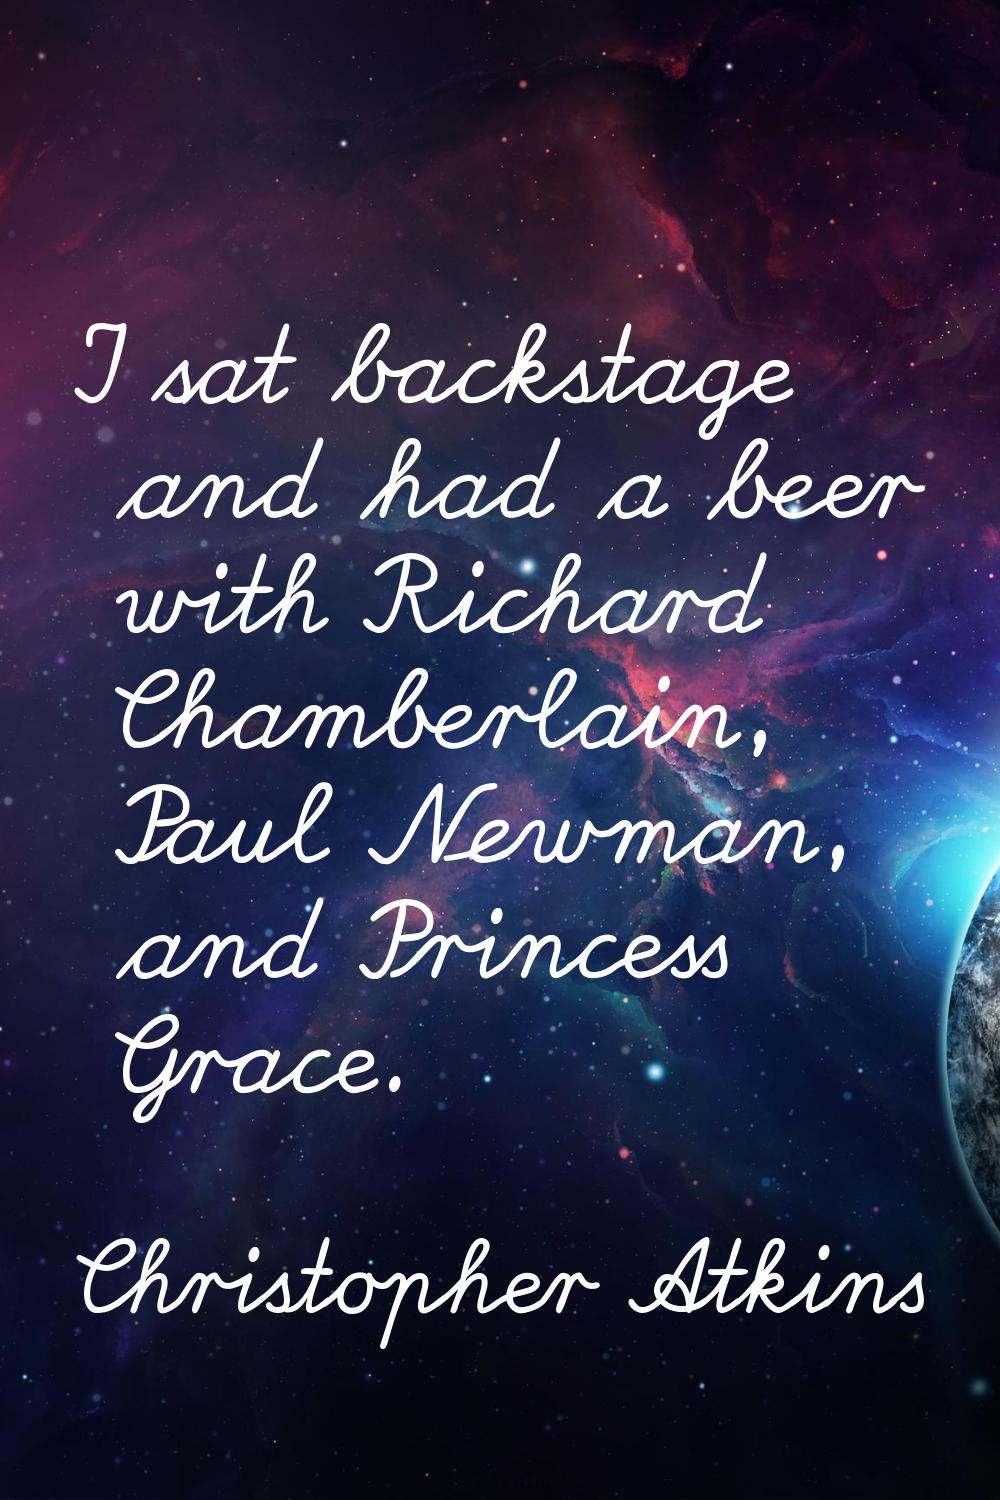 I sat backstage and had a beer with Richard Chamberlain, Paul Newman, and Princess Grace.